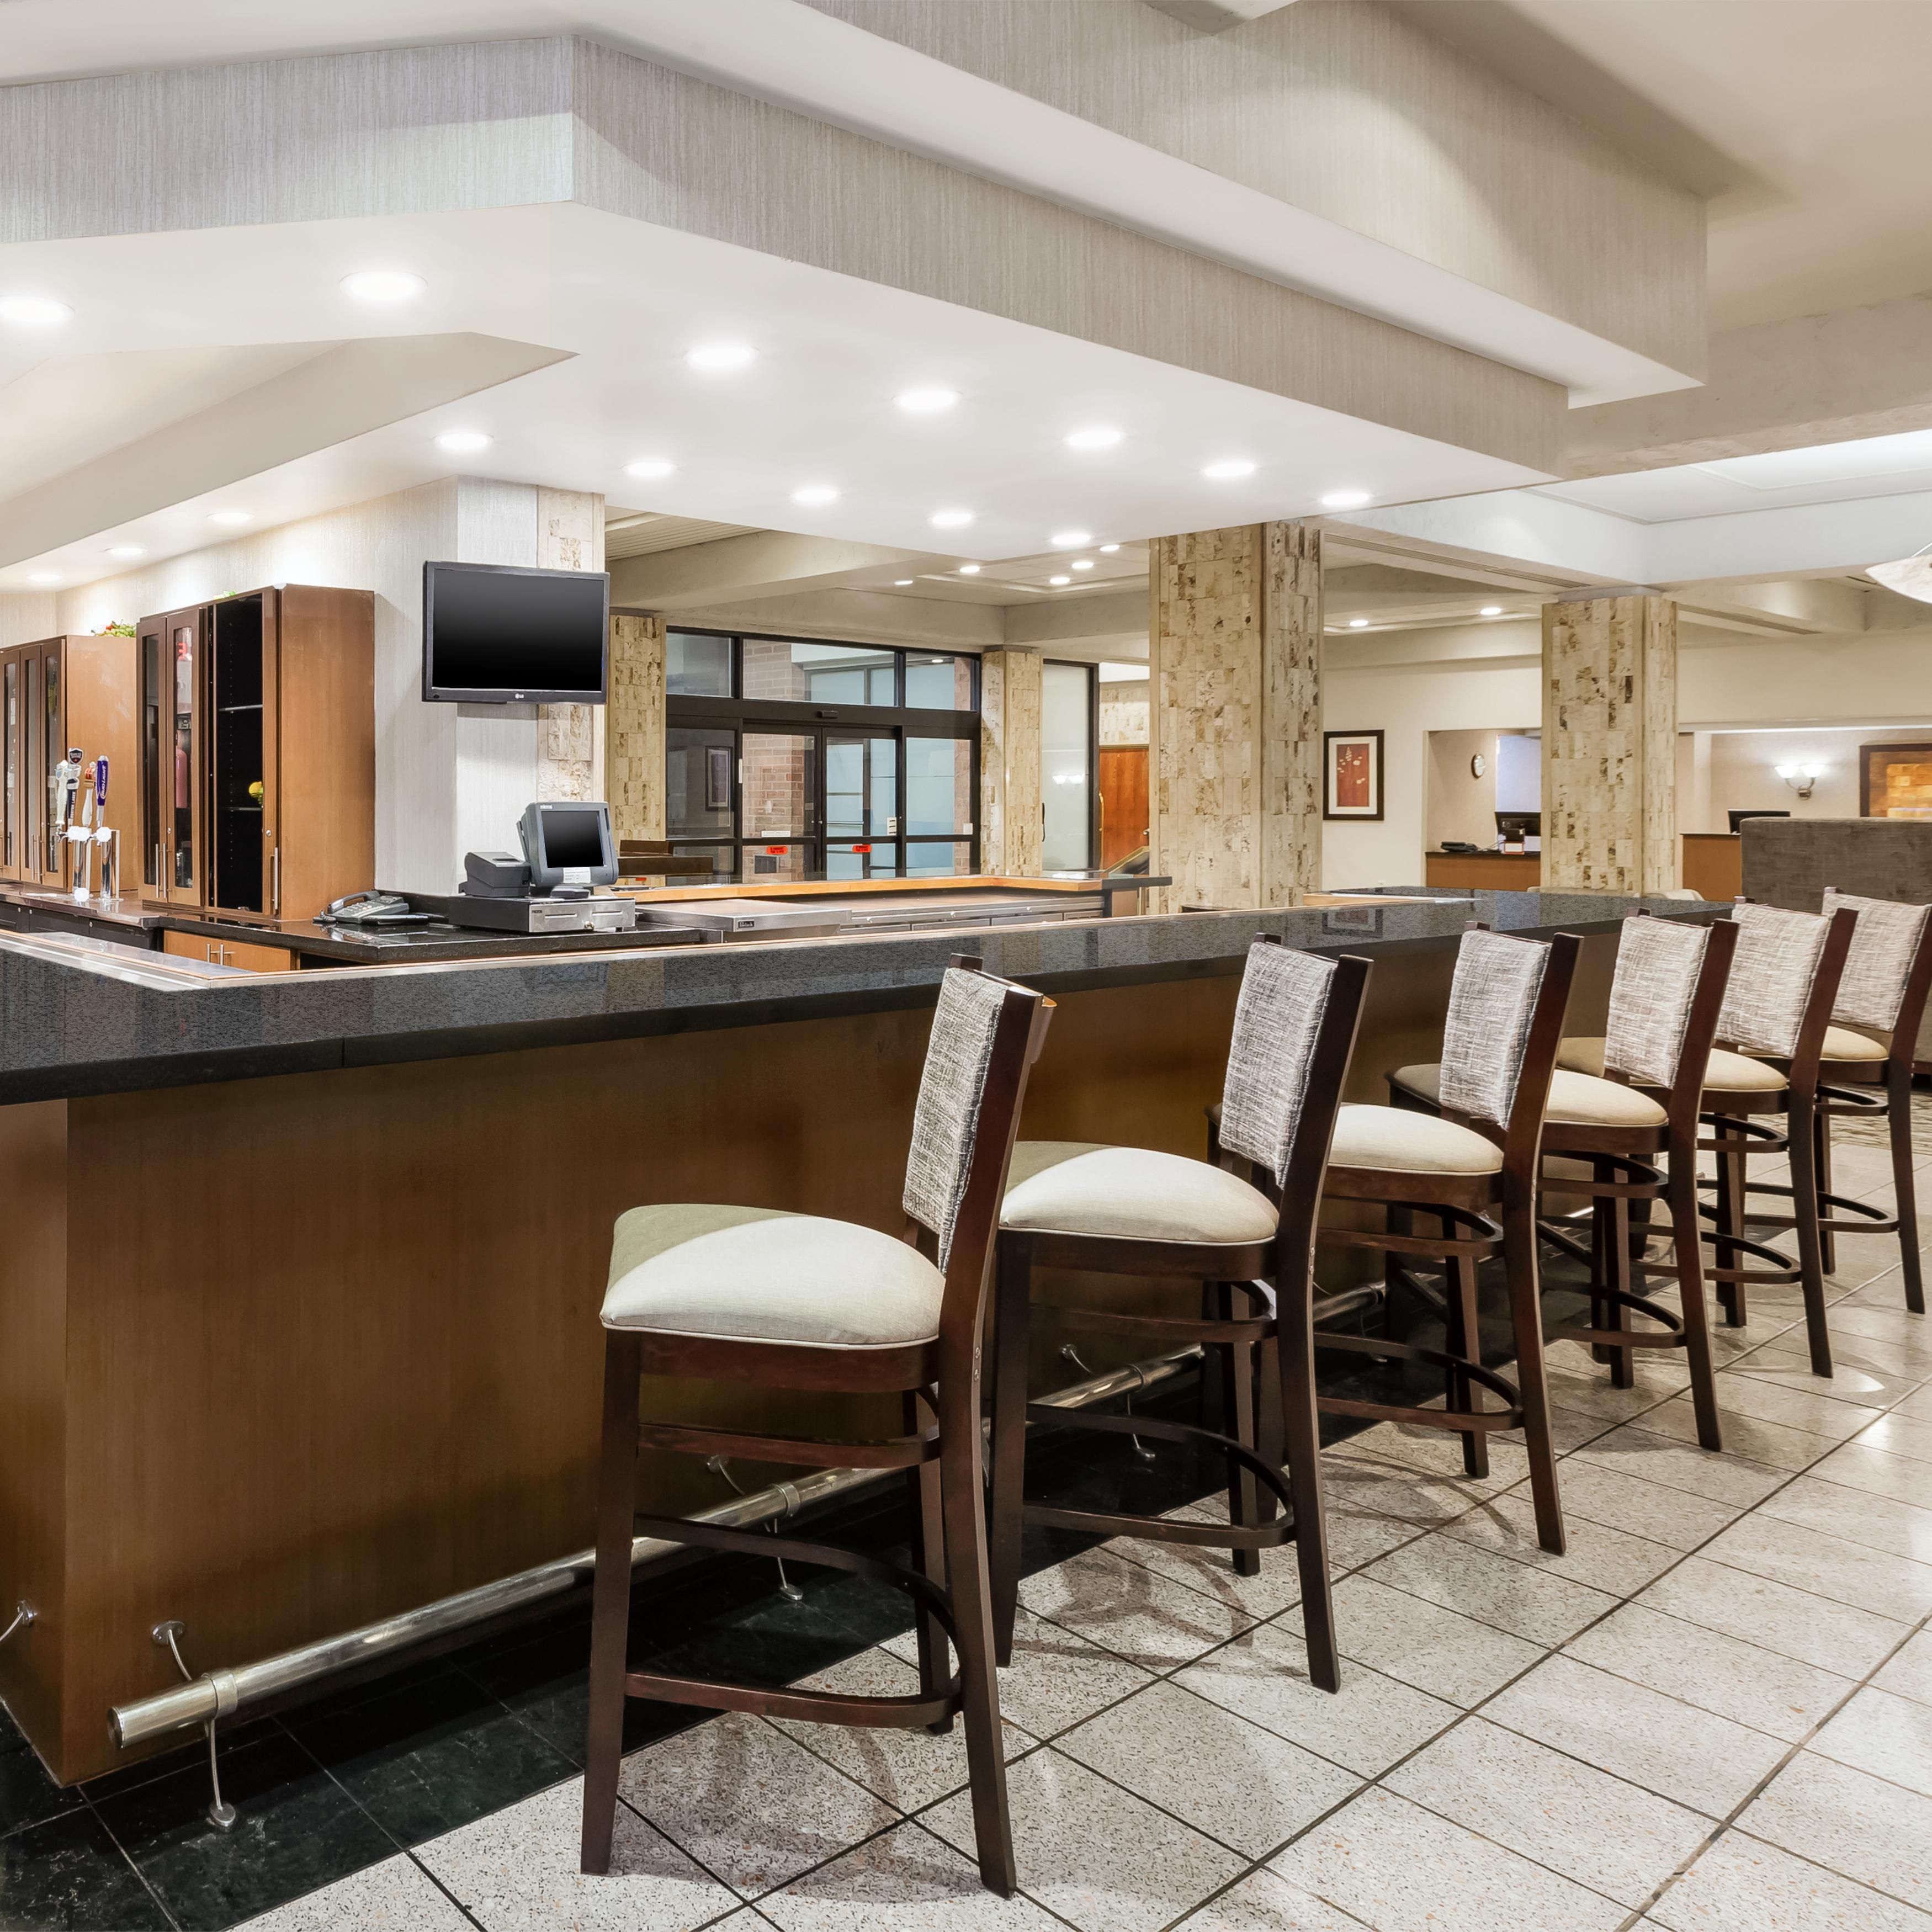 Enjoy a favorite drink at the Lobby Bar. Open at 2pm daily.